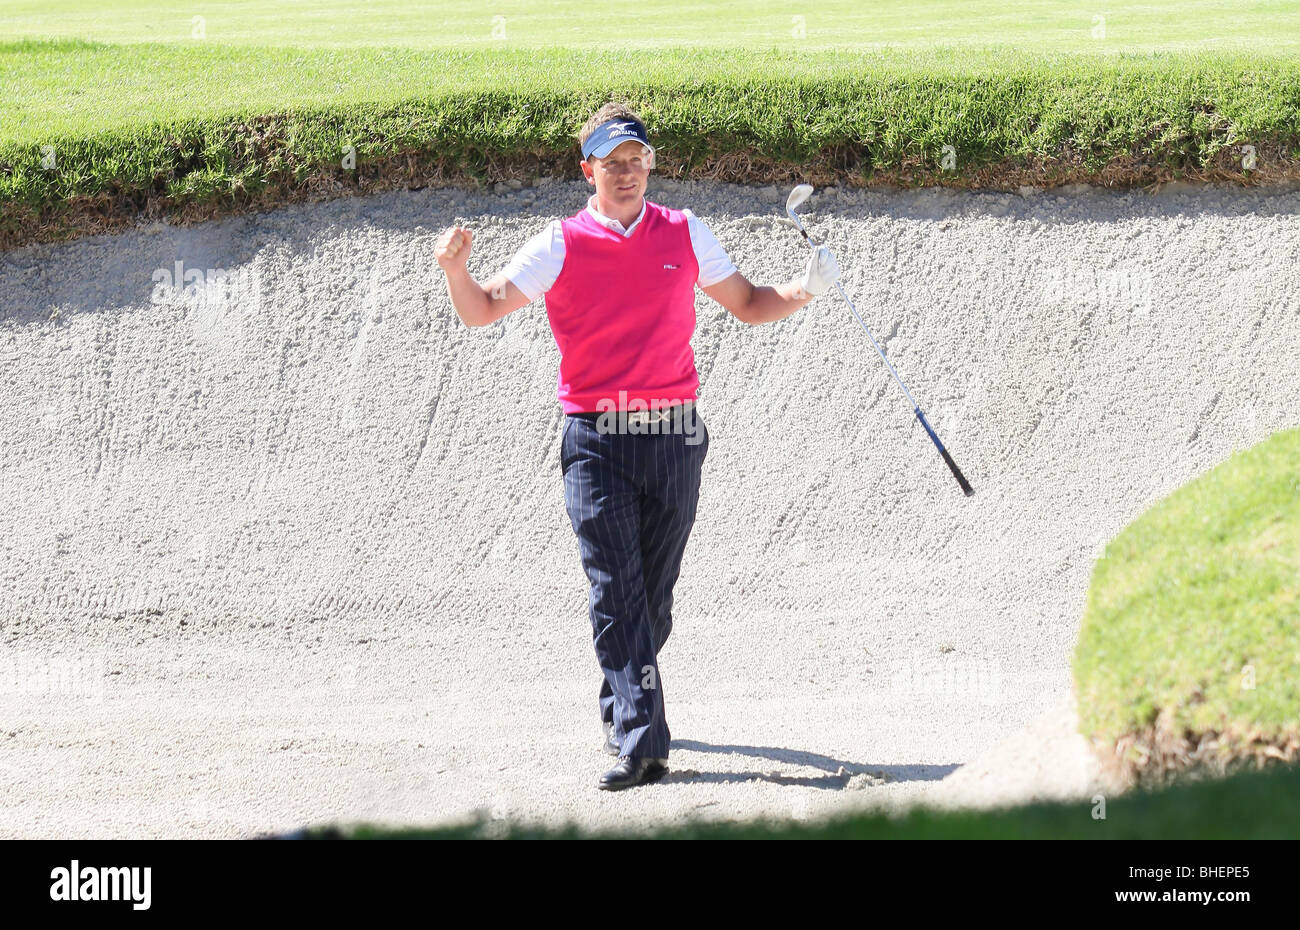 LUKE DONALD HOLES BUNKER SHOT ON 11TH PACIFIC PALISADES LOS ANGELES CA USA 07 February 2010 Stock Photo